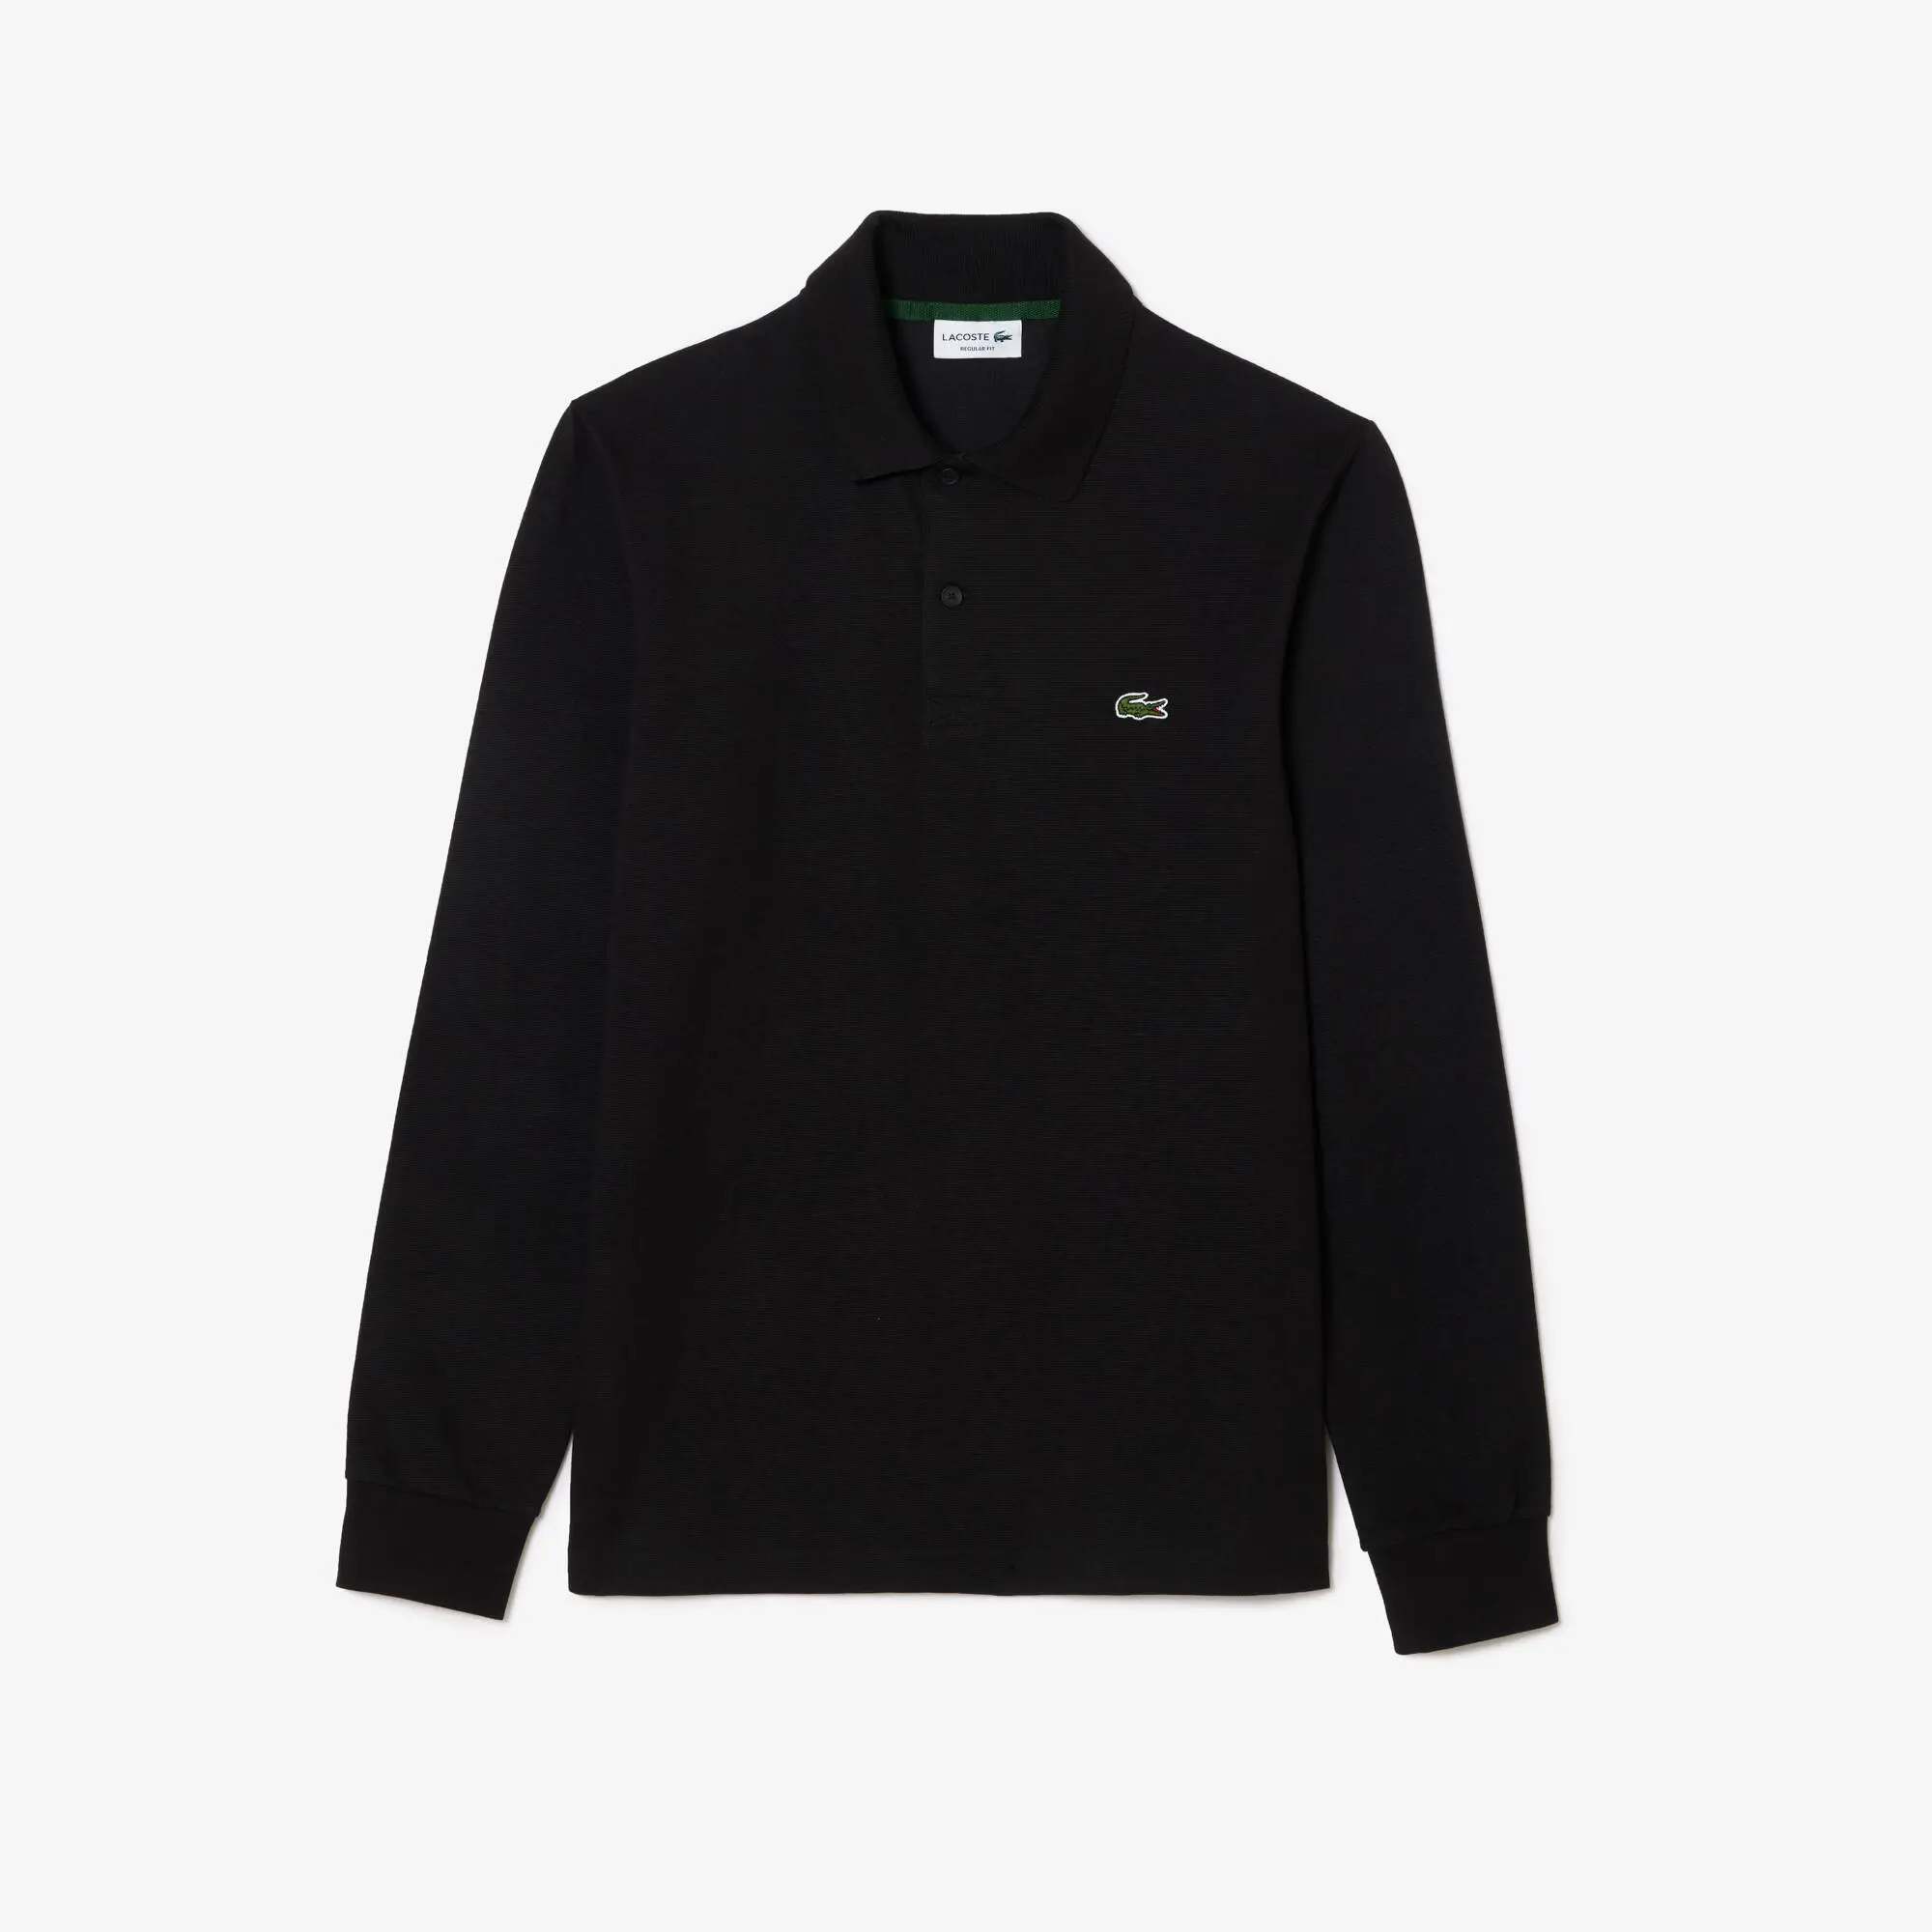 Lacoste Regular Fit Long Sleeve Polyester Cotton Polo Shirt. 2